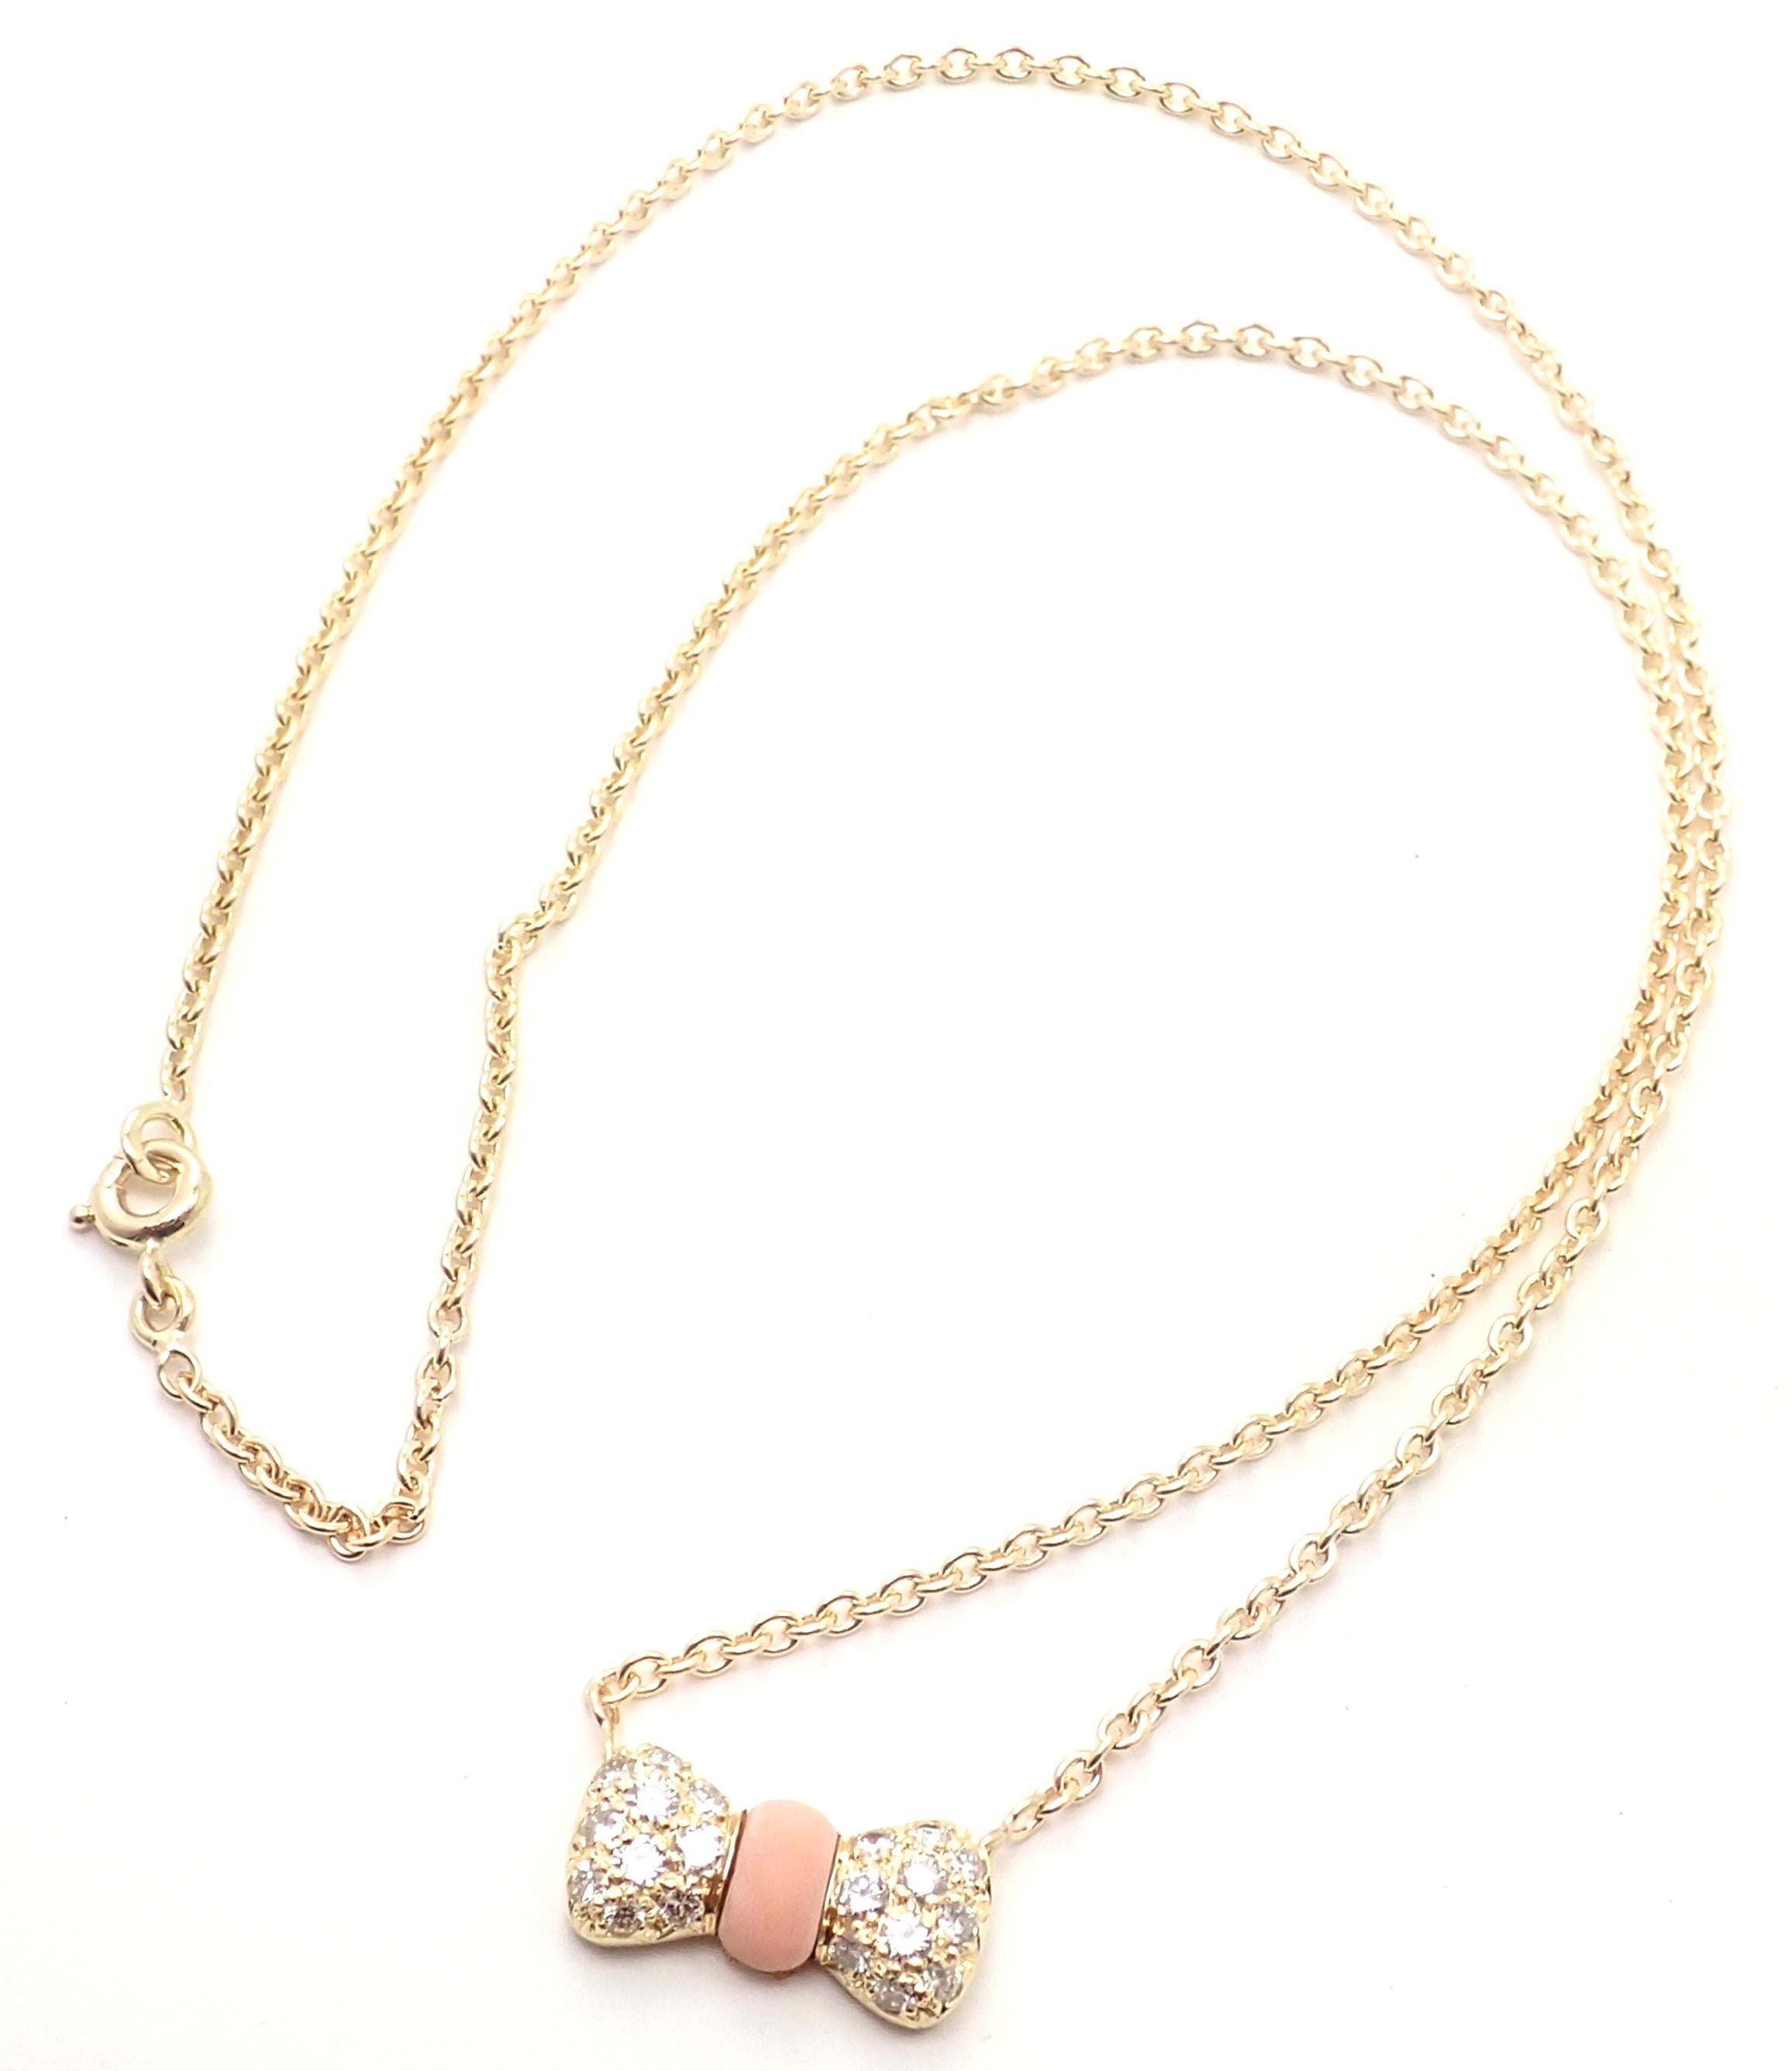 Van Cleef & Arpels Coral Diamond Yellow Gold Bow Necklace In Excellent Condition For Sale In Holland, PA